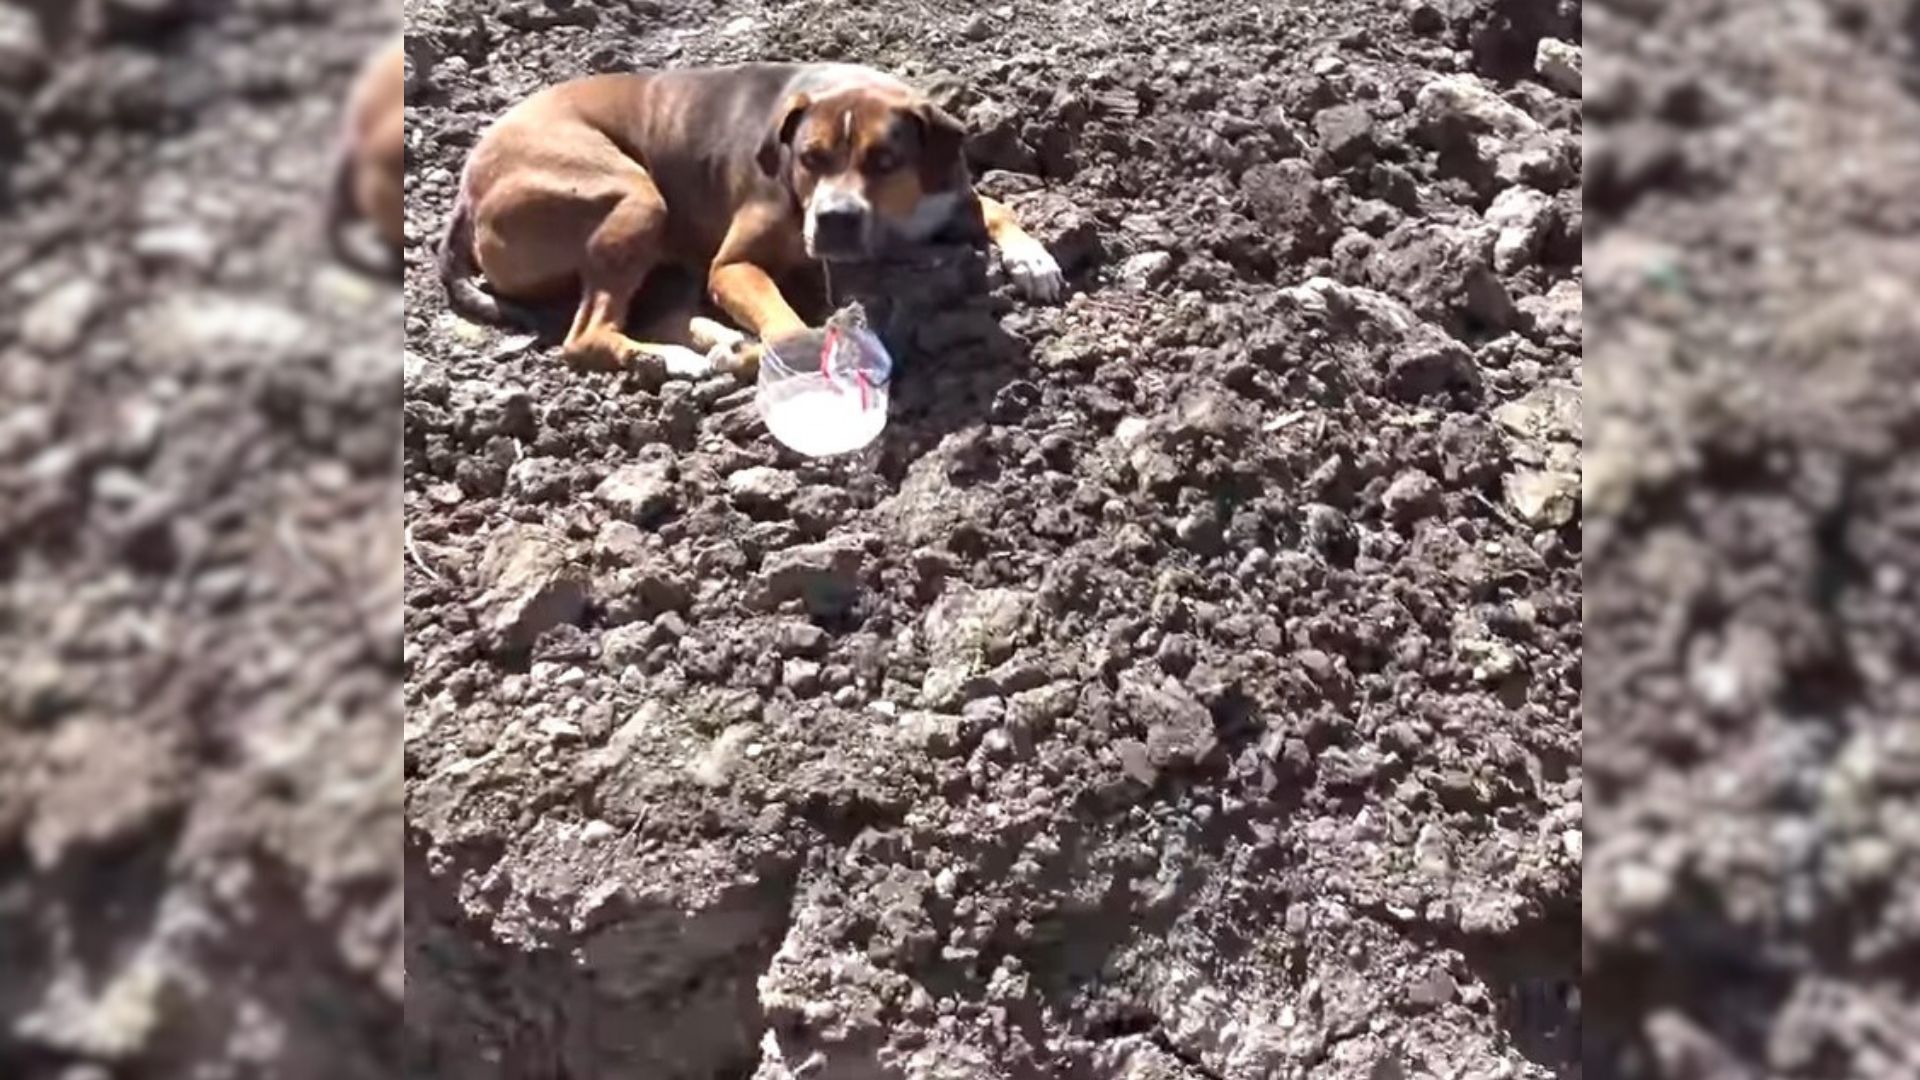 Rescuers Received A Call About A Dog Abandoned On A Construction Site And Went To Help